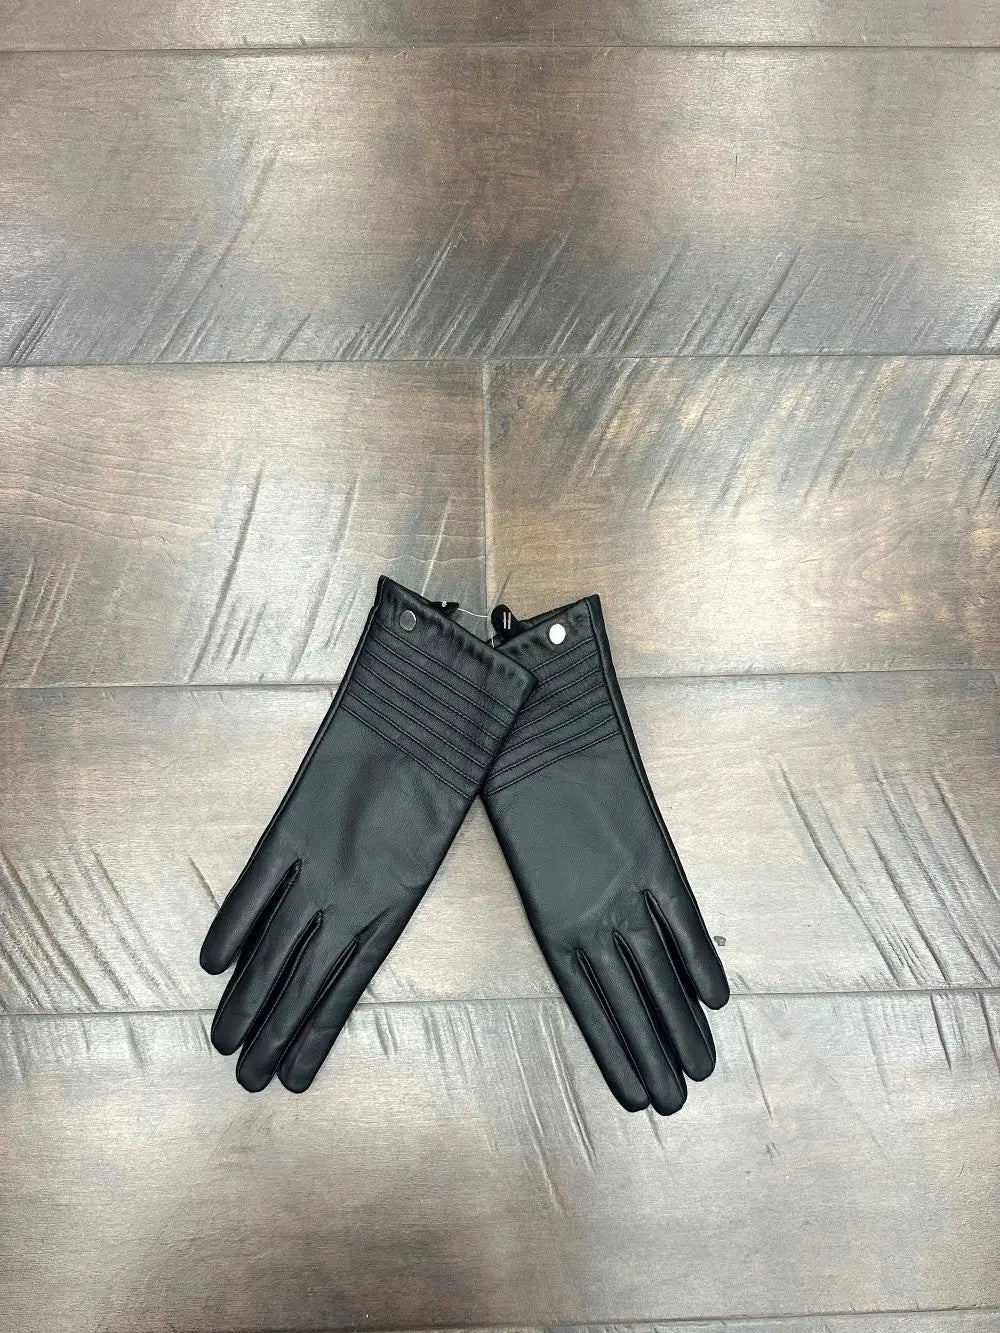 LaBelle Since 1919 Leather Gloves w/ Ribbed Top